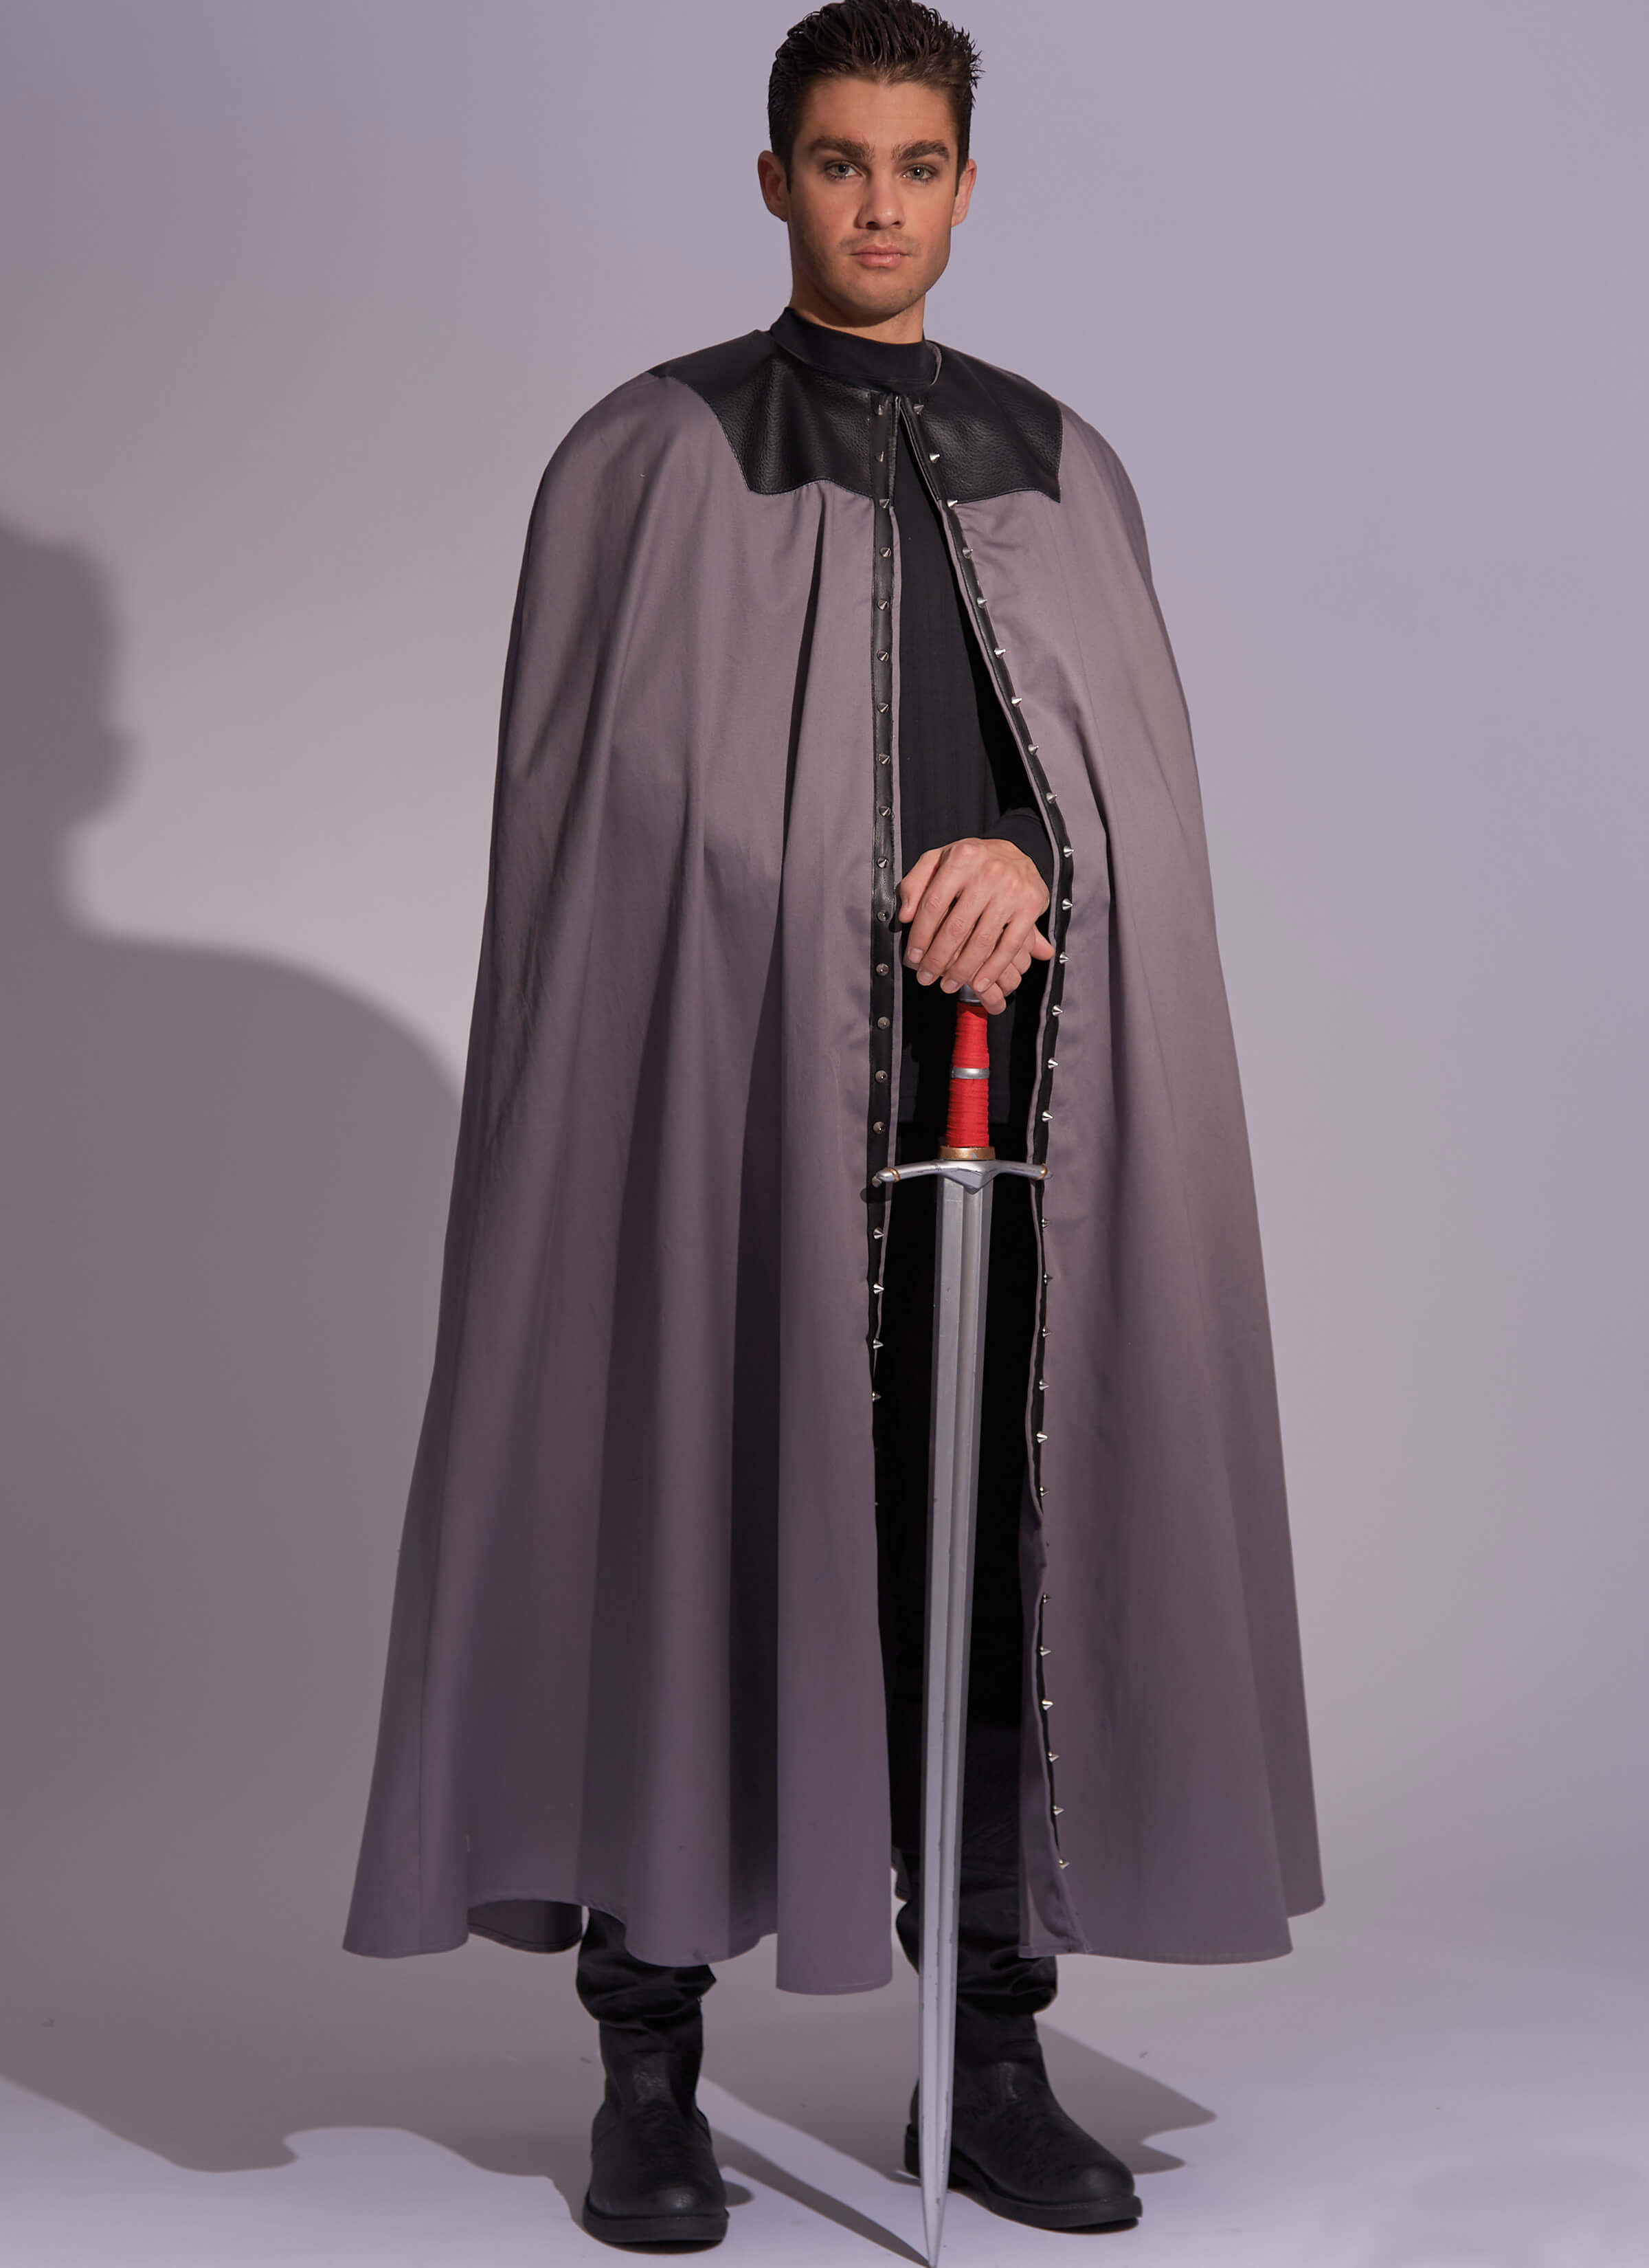 McCall's Sewing Pattern M8335 Men's and Misses' Costume Capes